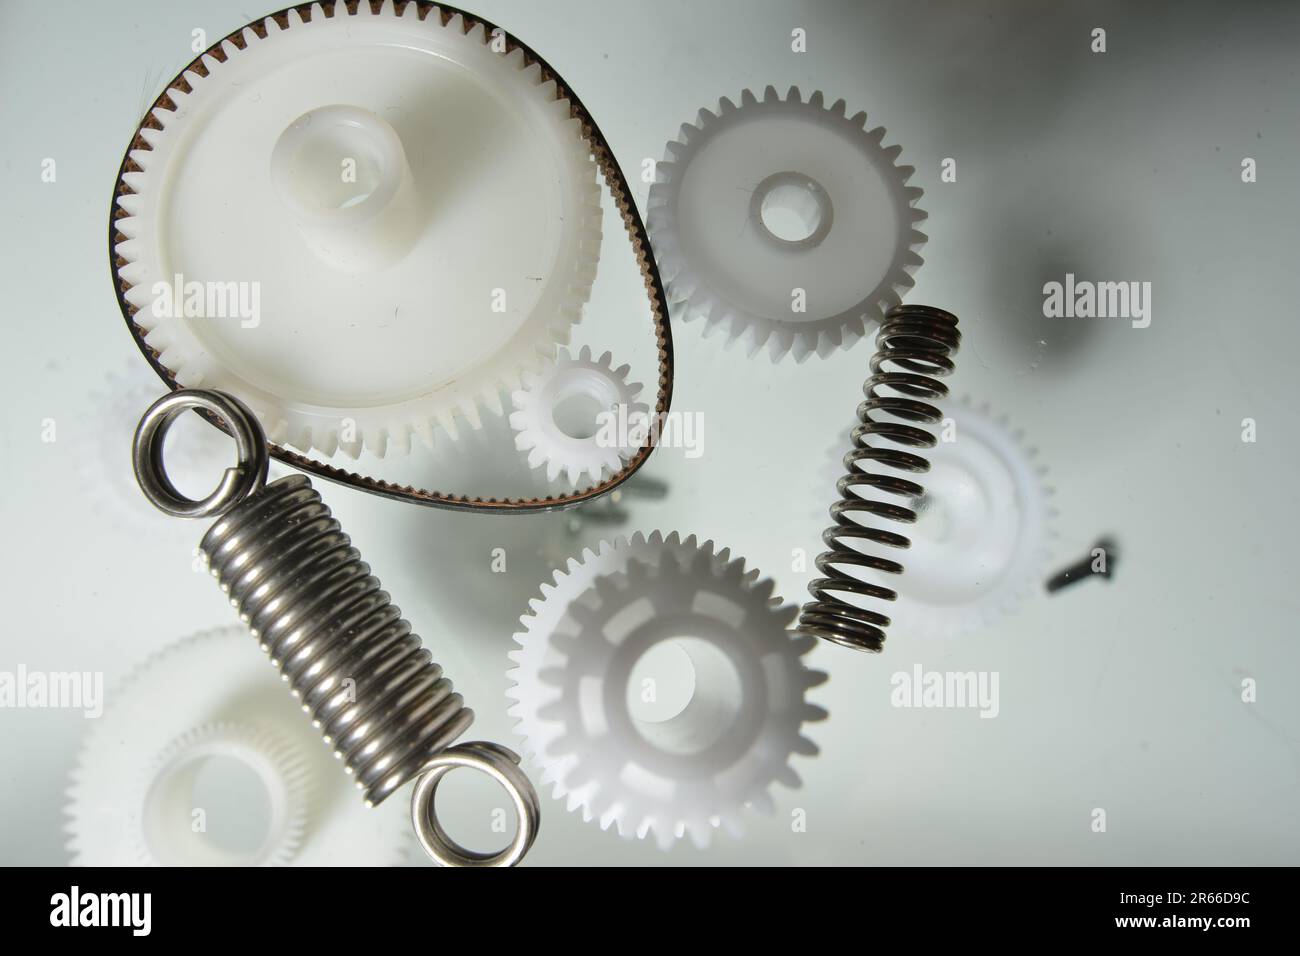 Gear wheels, springs, parts. Plastic gears. Monochrome picture of plastic and metal parts. Creativity from small plastic parts. Printer parts. Stock Photo